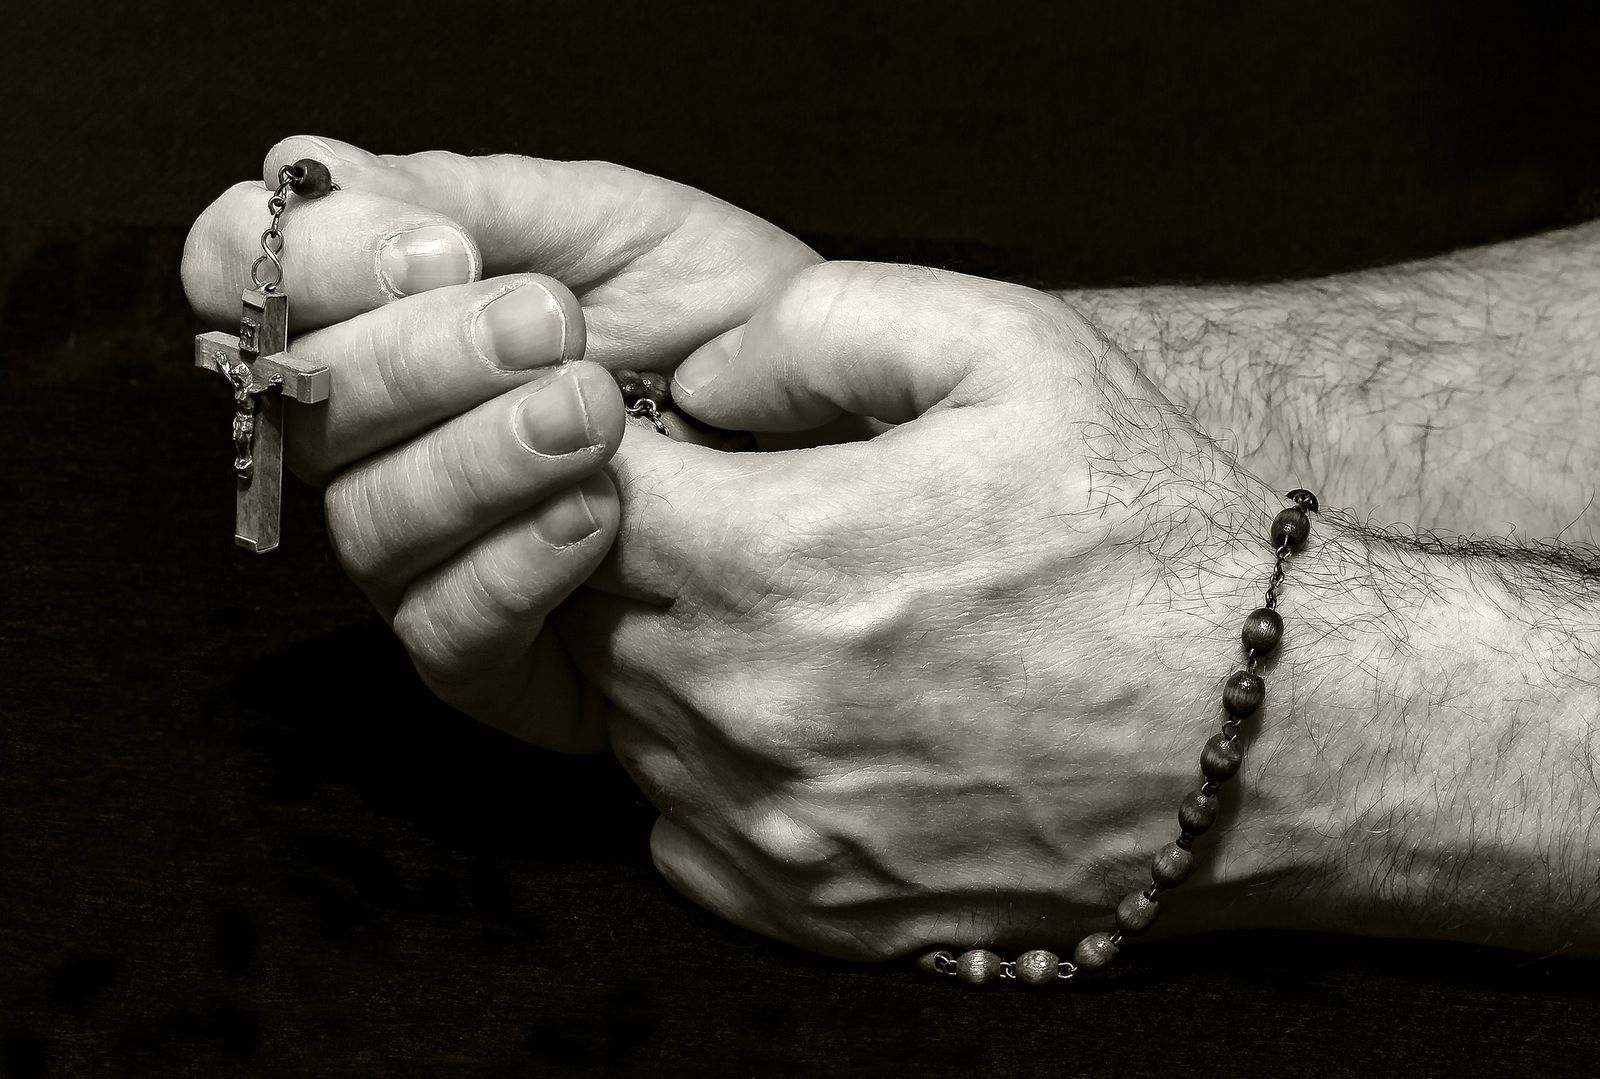 Praying with Rosary